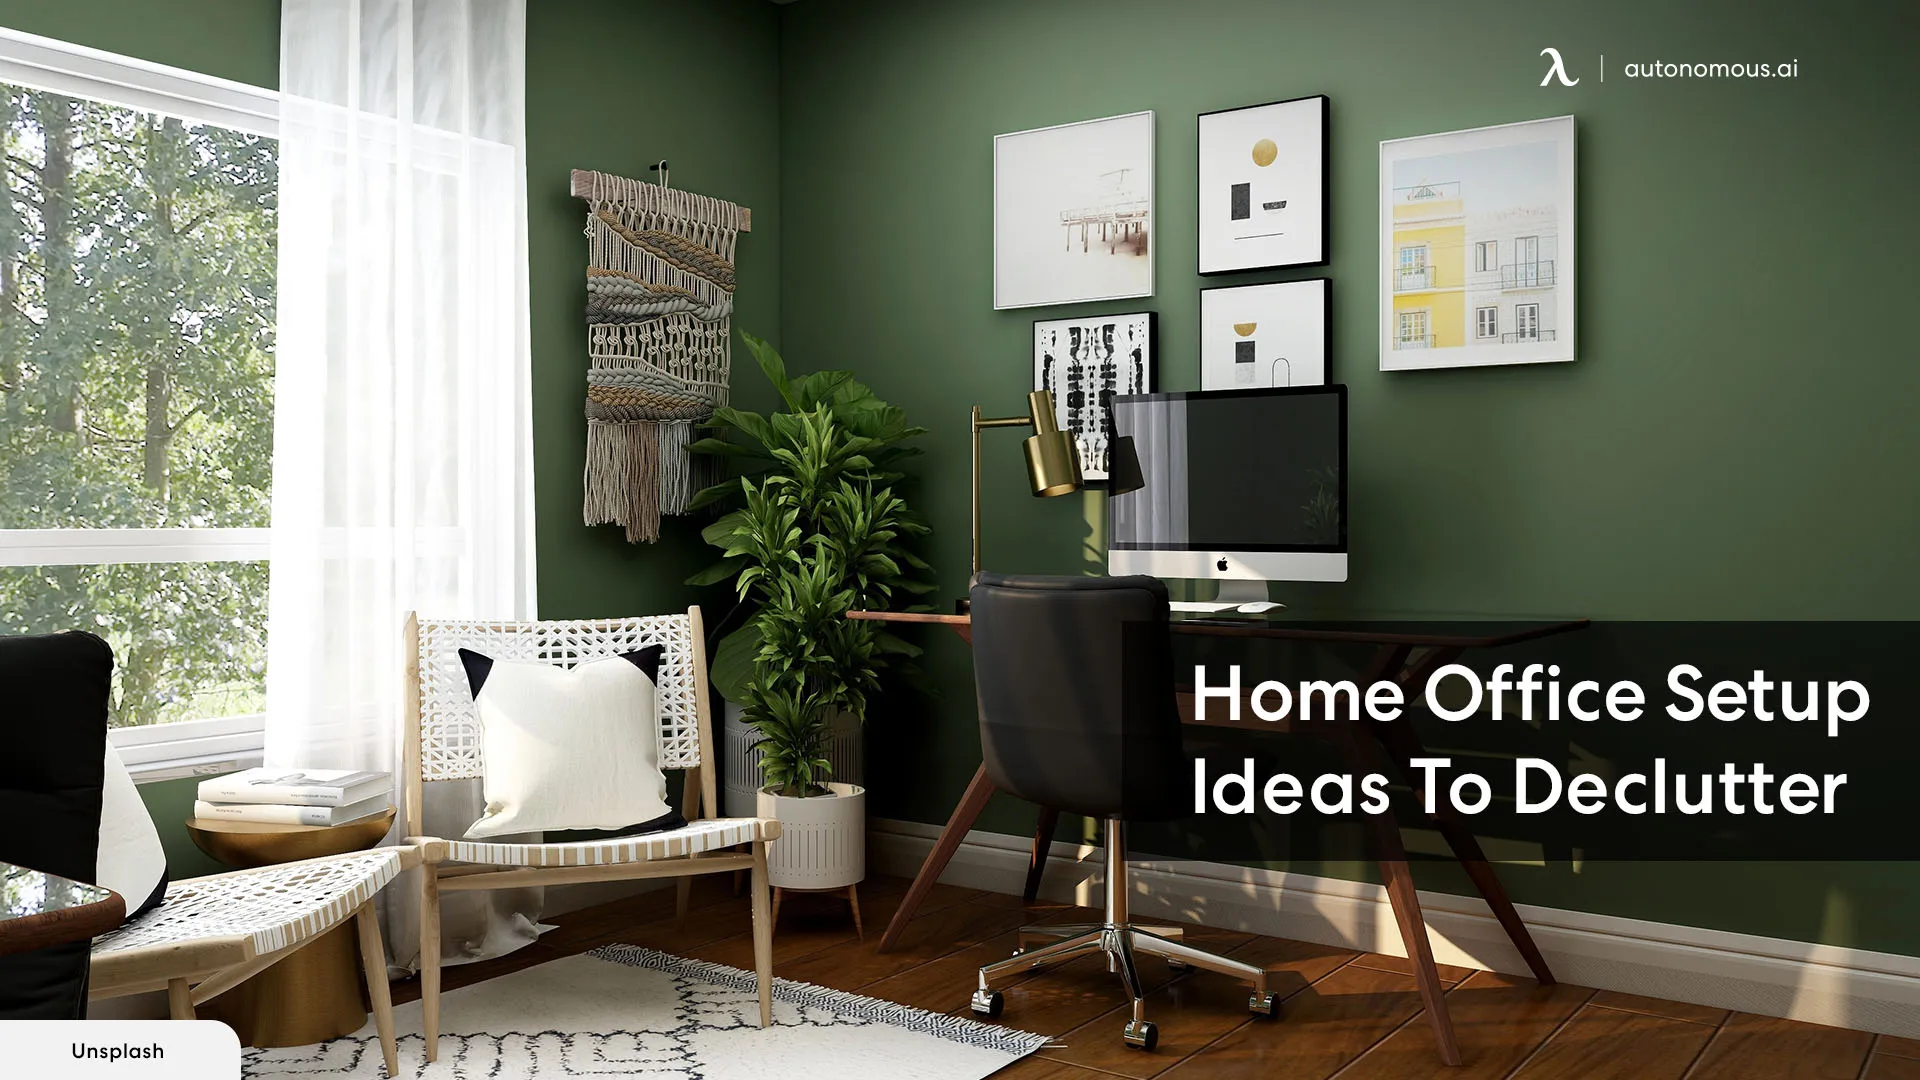 Home Office Setup Tips: Things You Should Not Keep